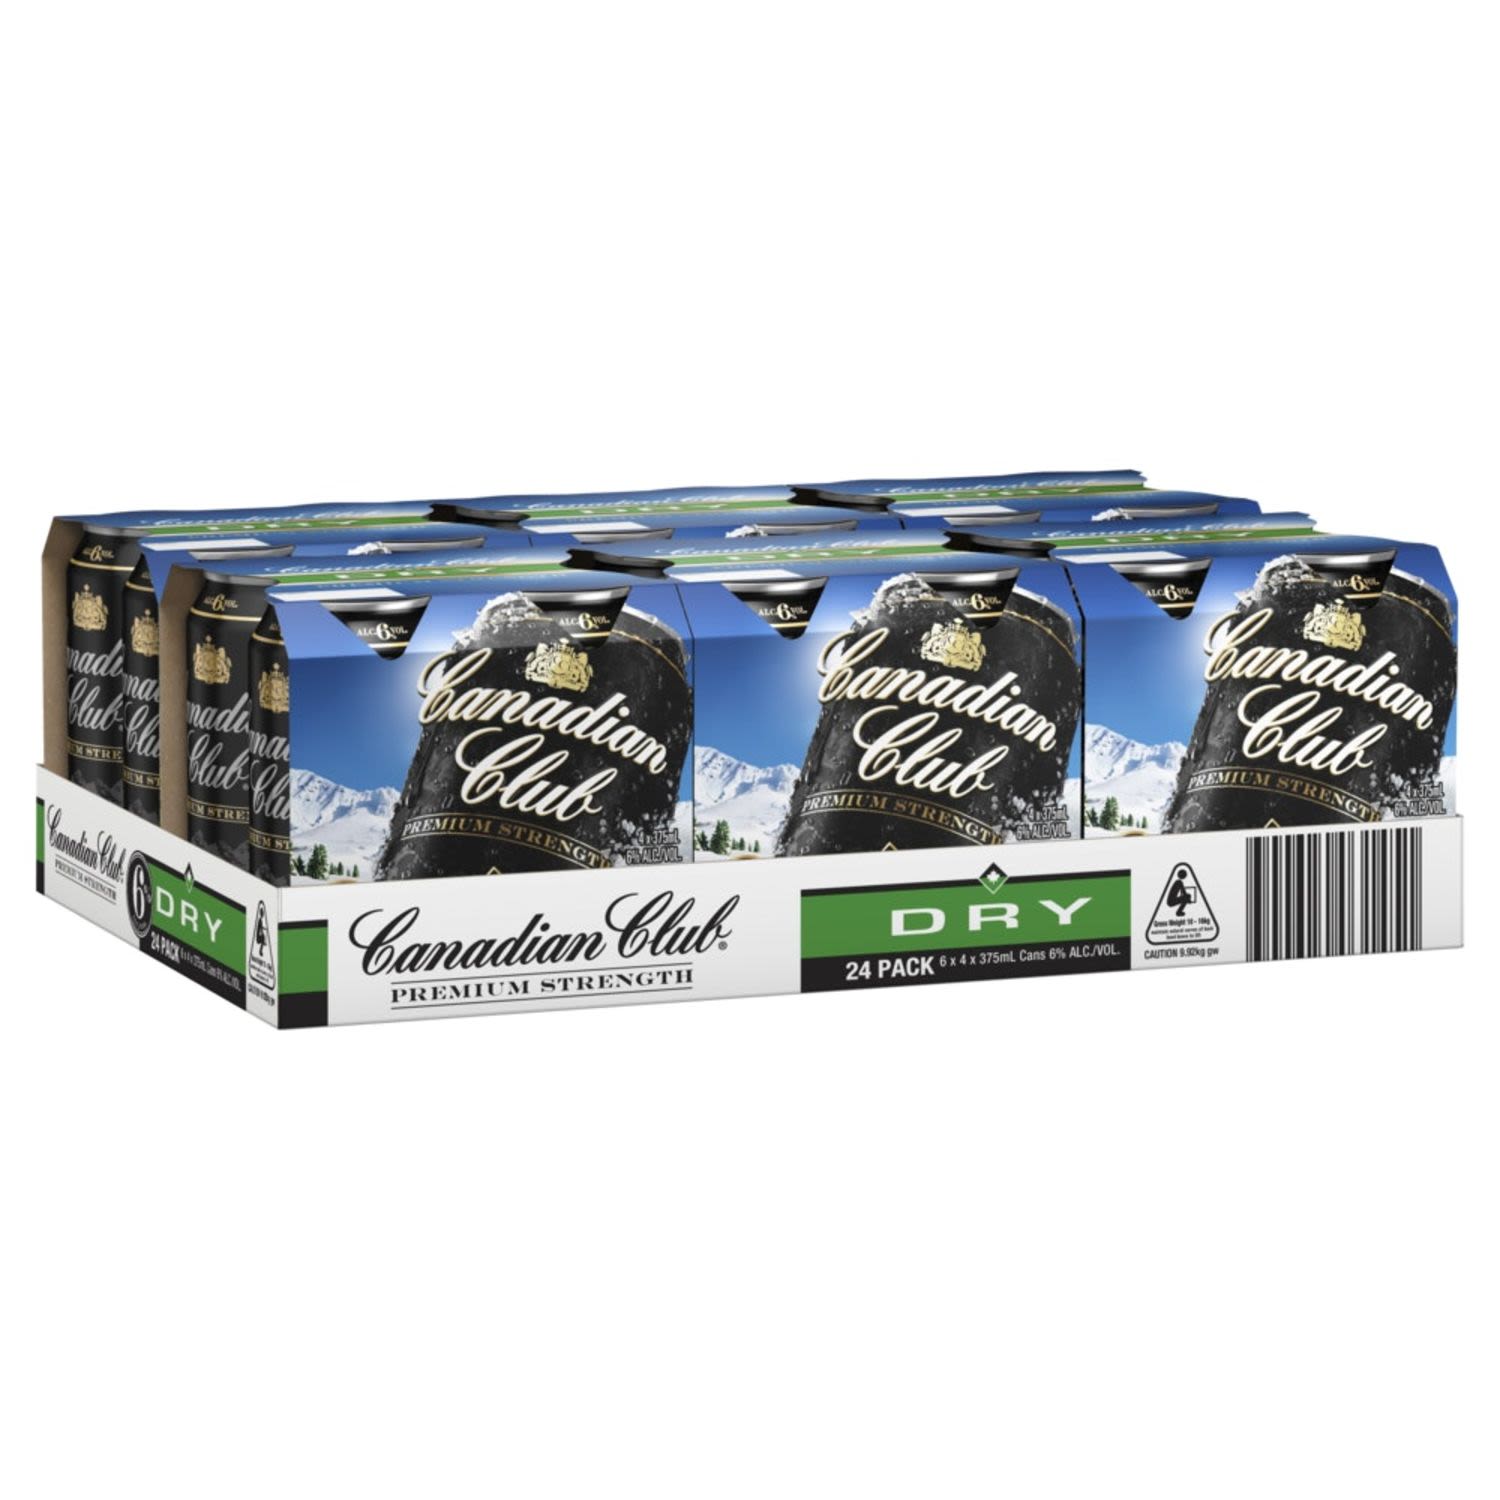 Canadian Club & Dry Premium 6% Can 375mL 24 Pack